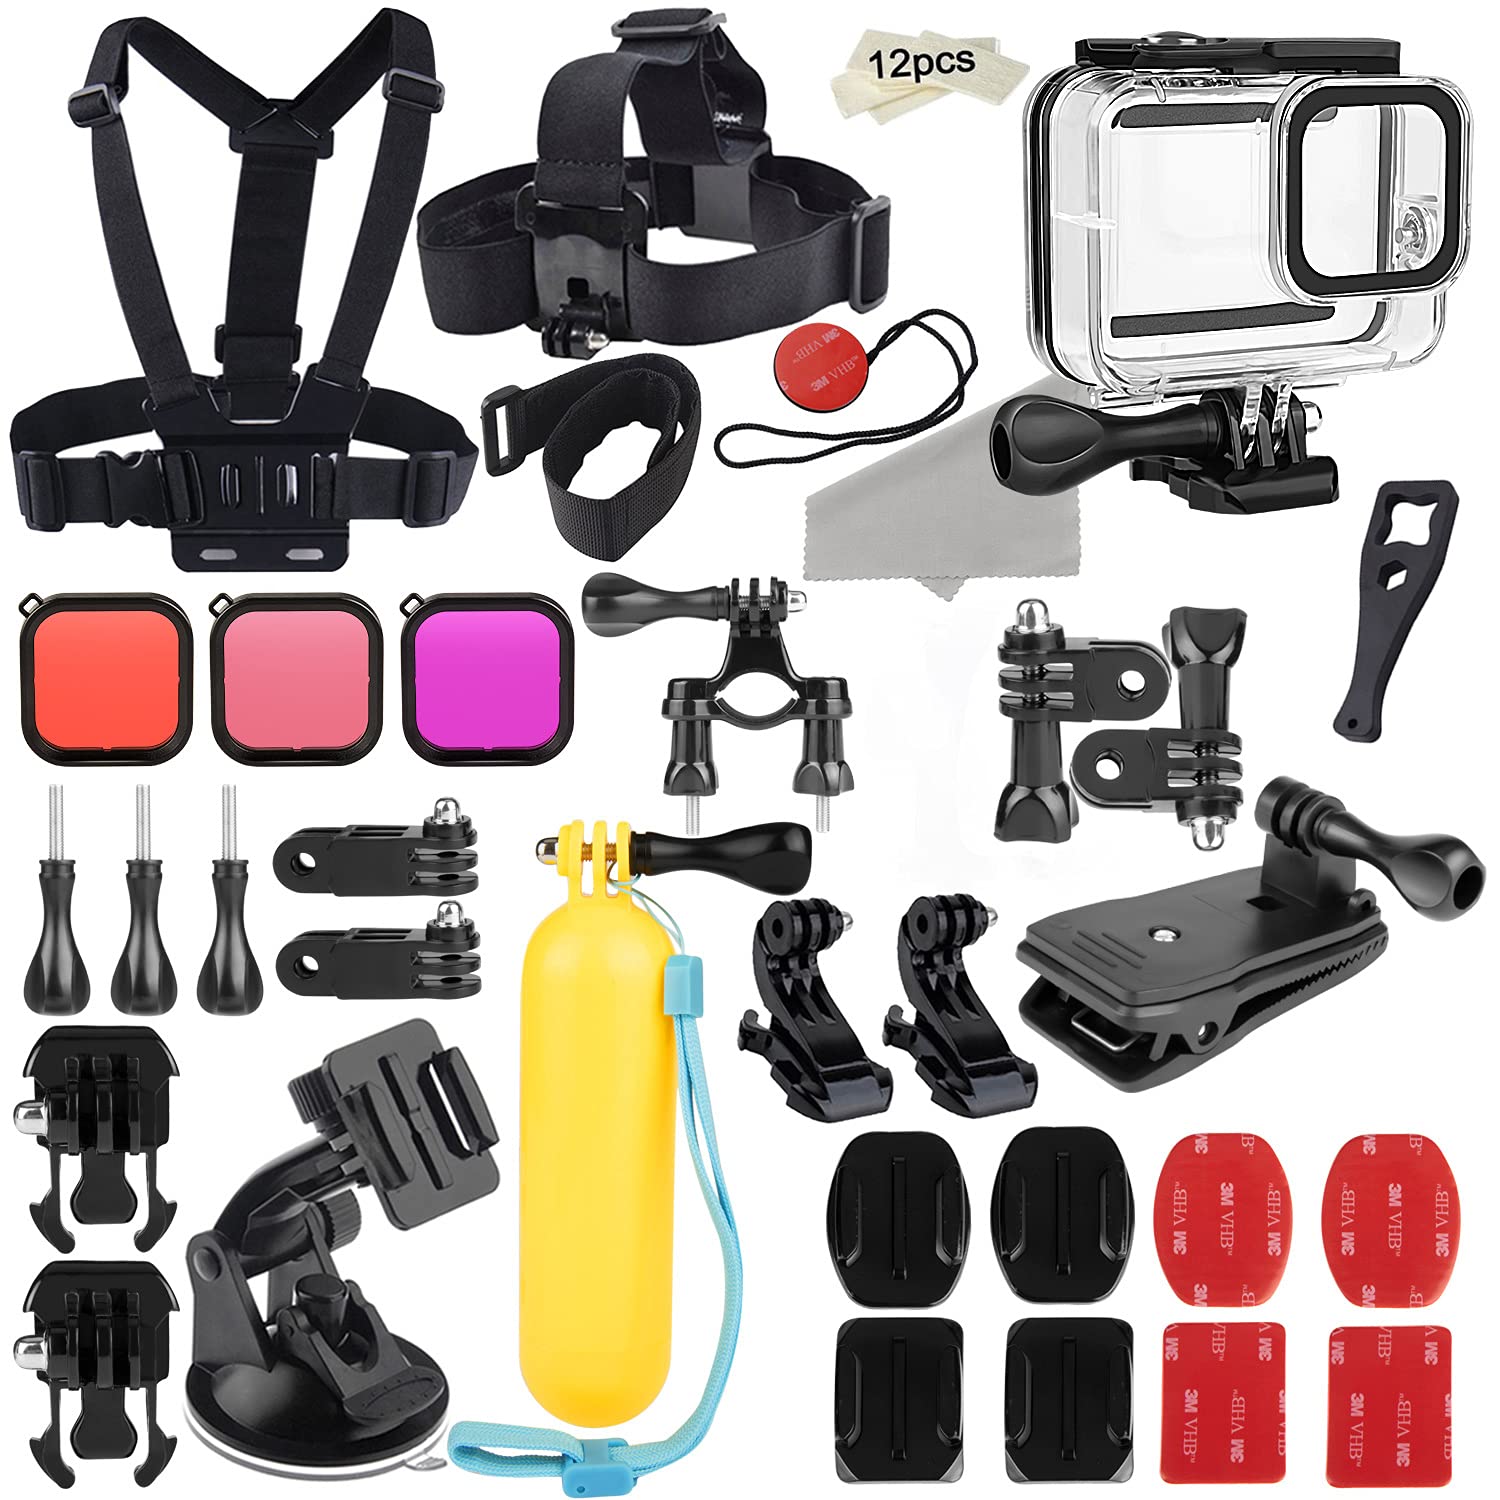 52-in-1 Accessories Kit Compatible with GoPro Hero 8 Black, Waterproof Housing Case + Filters + Head Chest Strap Suction Cup Mount + Bicycle Mount + Floating Grip Accessories for Gopro 8 Black